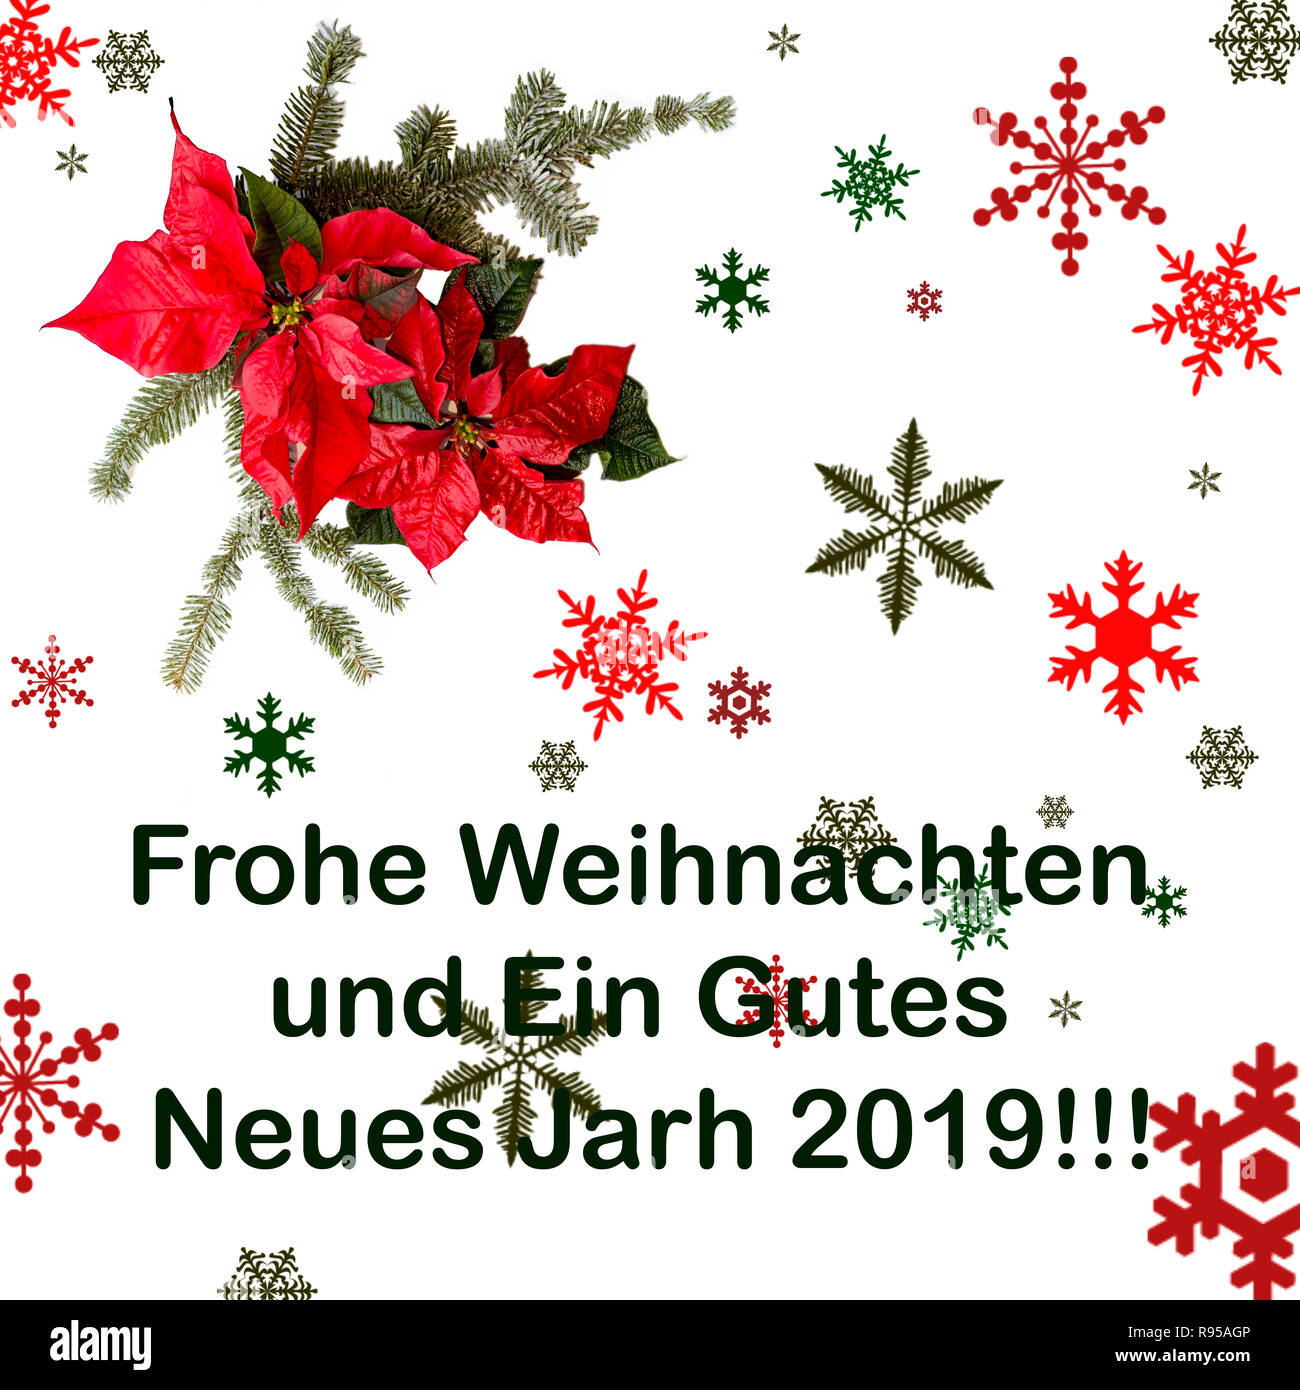 Poinsettia flower with fir tree and snow on white background. Greetings Christmas card. Postcard. Christmastime. Red, white and green." frohe weihnach Stock Photo